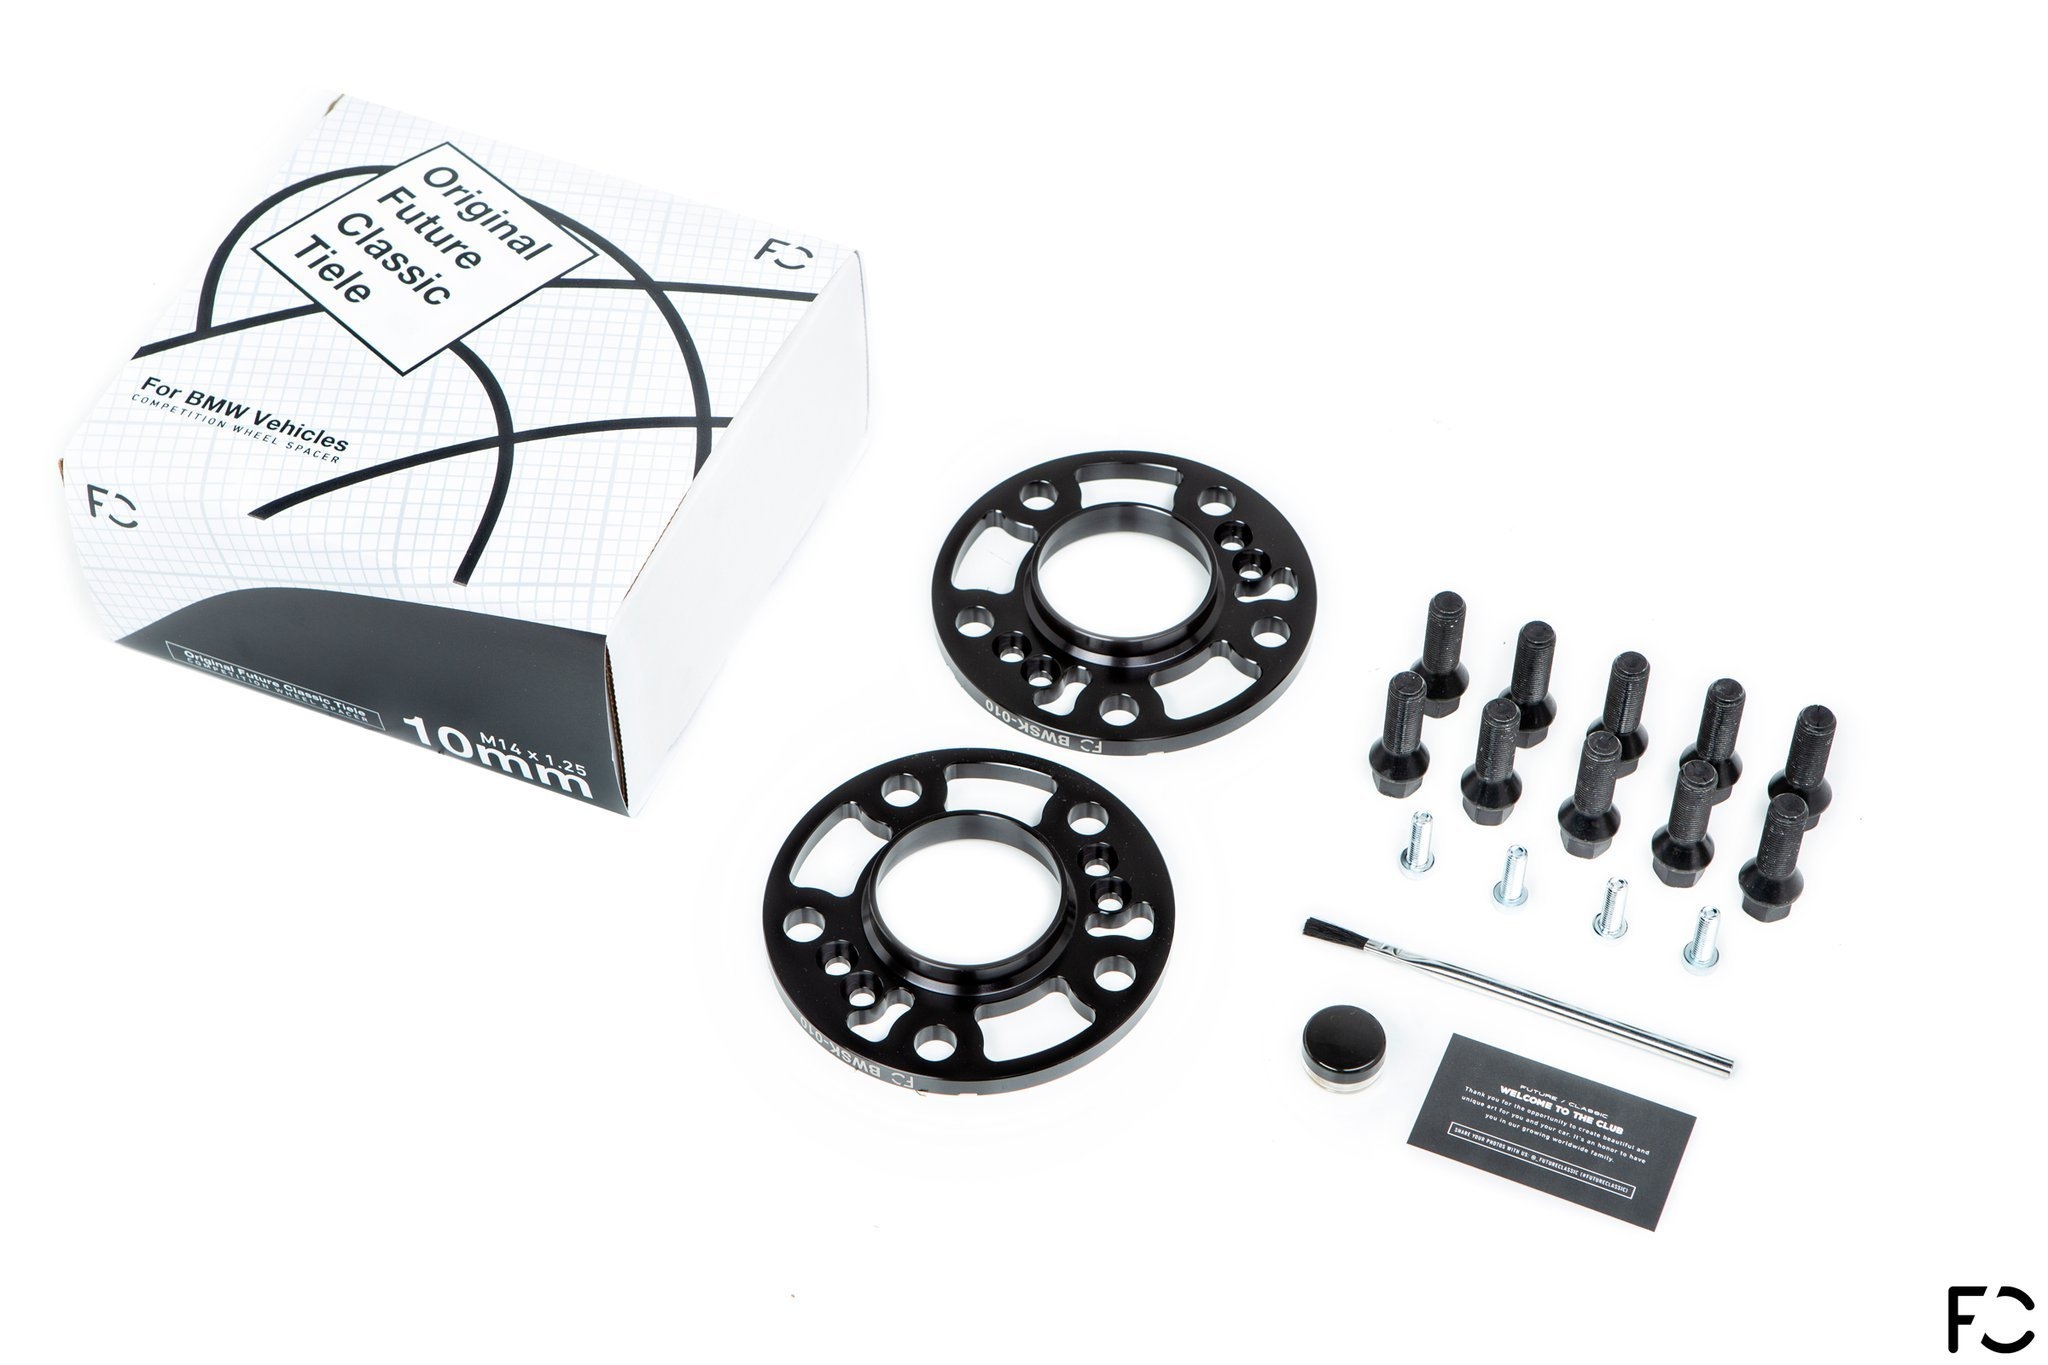 Future Classic 5×120 Wheel Spacer Kit for BMW (2002-2021, Fxx) 18mm – M14 x 1.25 – AUTOID